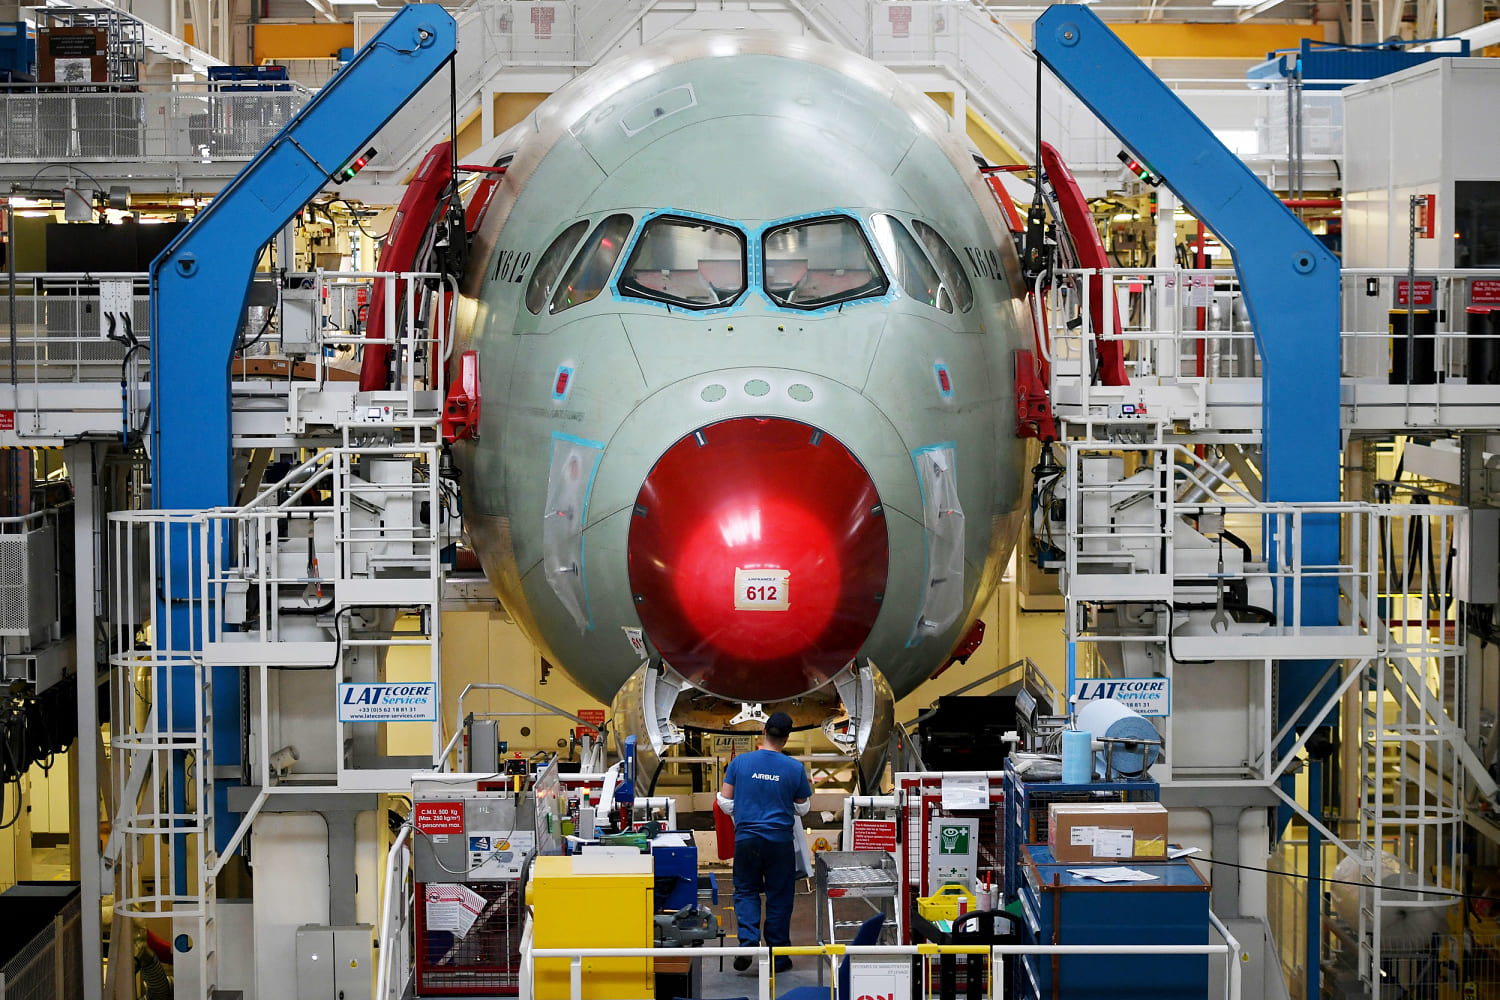 Boeing and Airbus may have used 'counterfeit' titanium in planes, FAA says